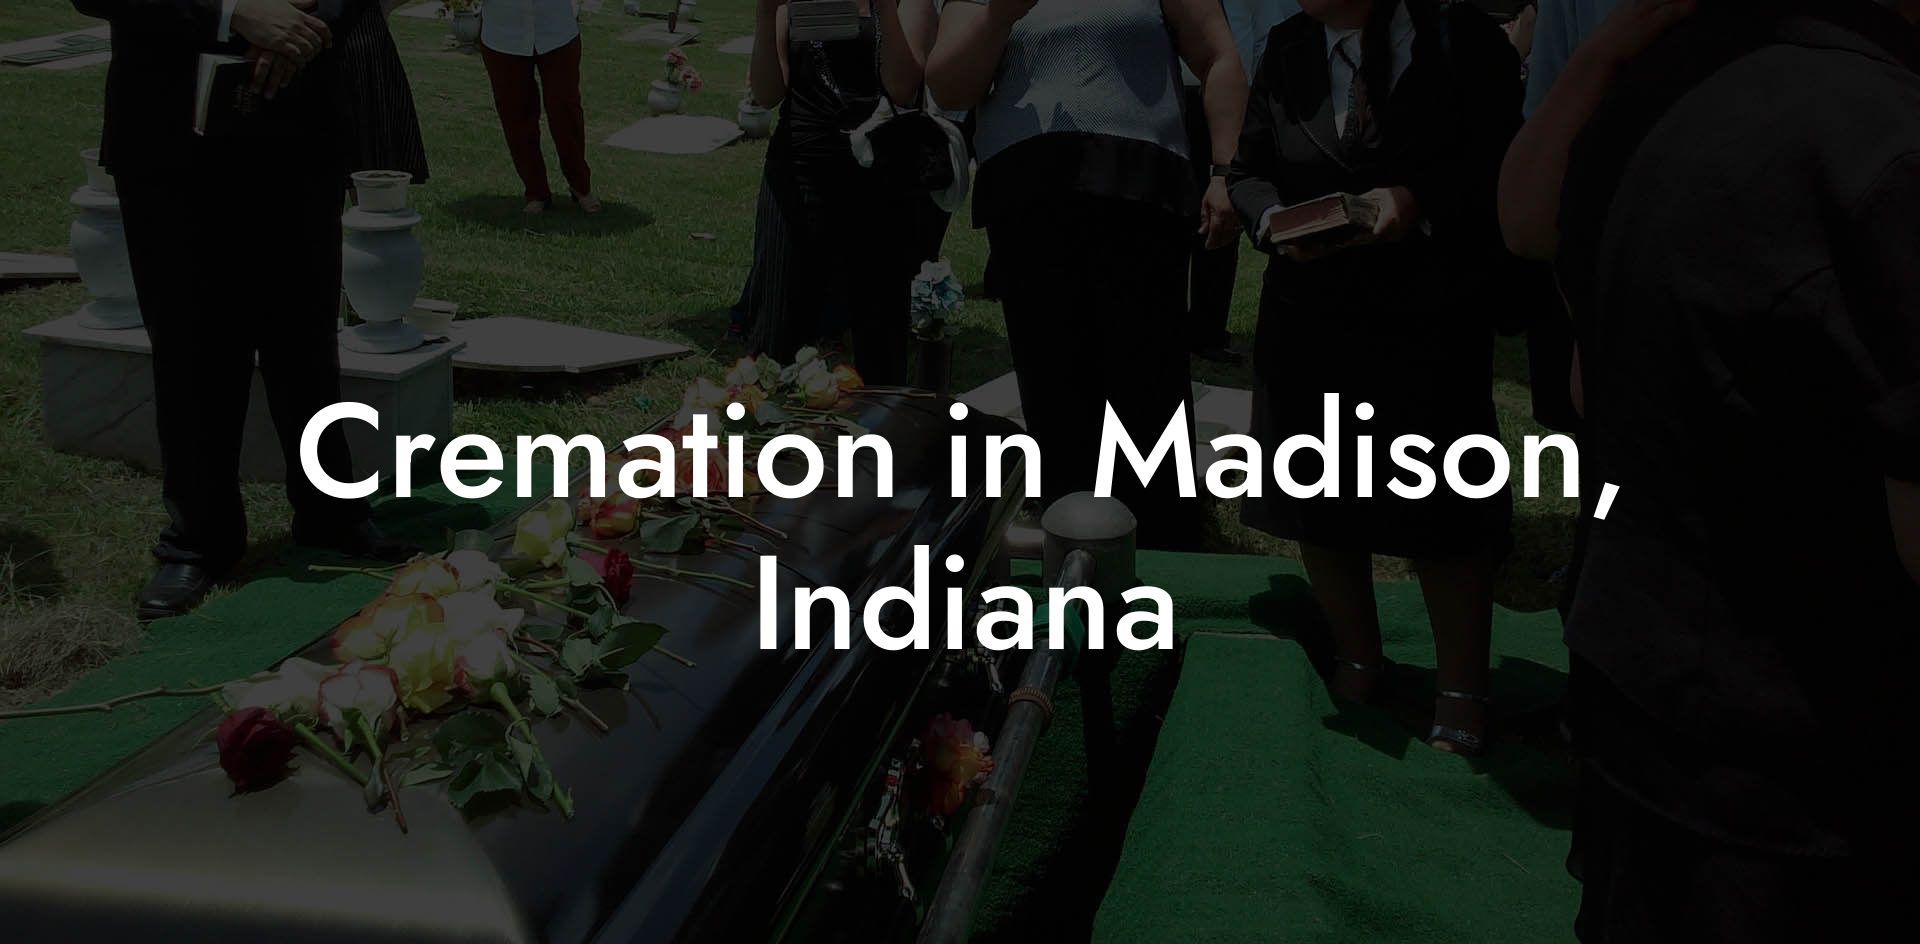 Cremation in Madison, Indiana